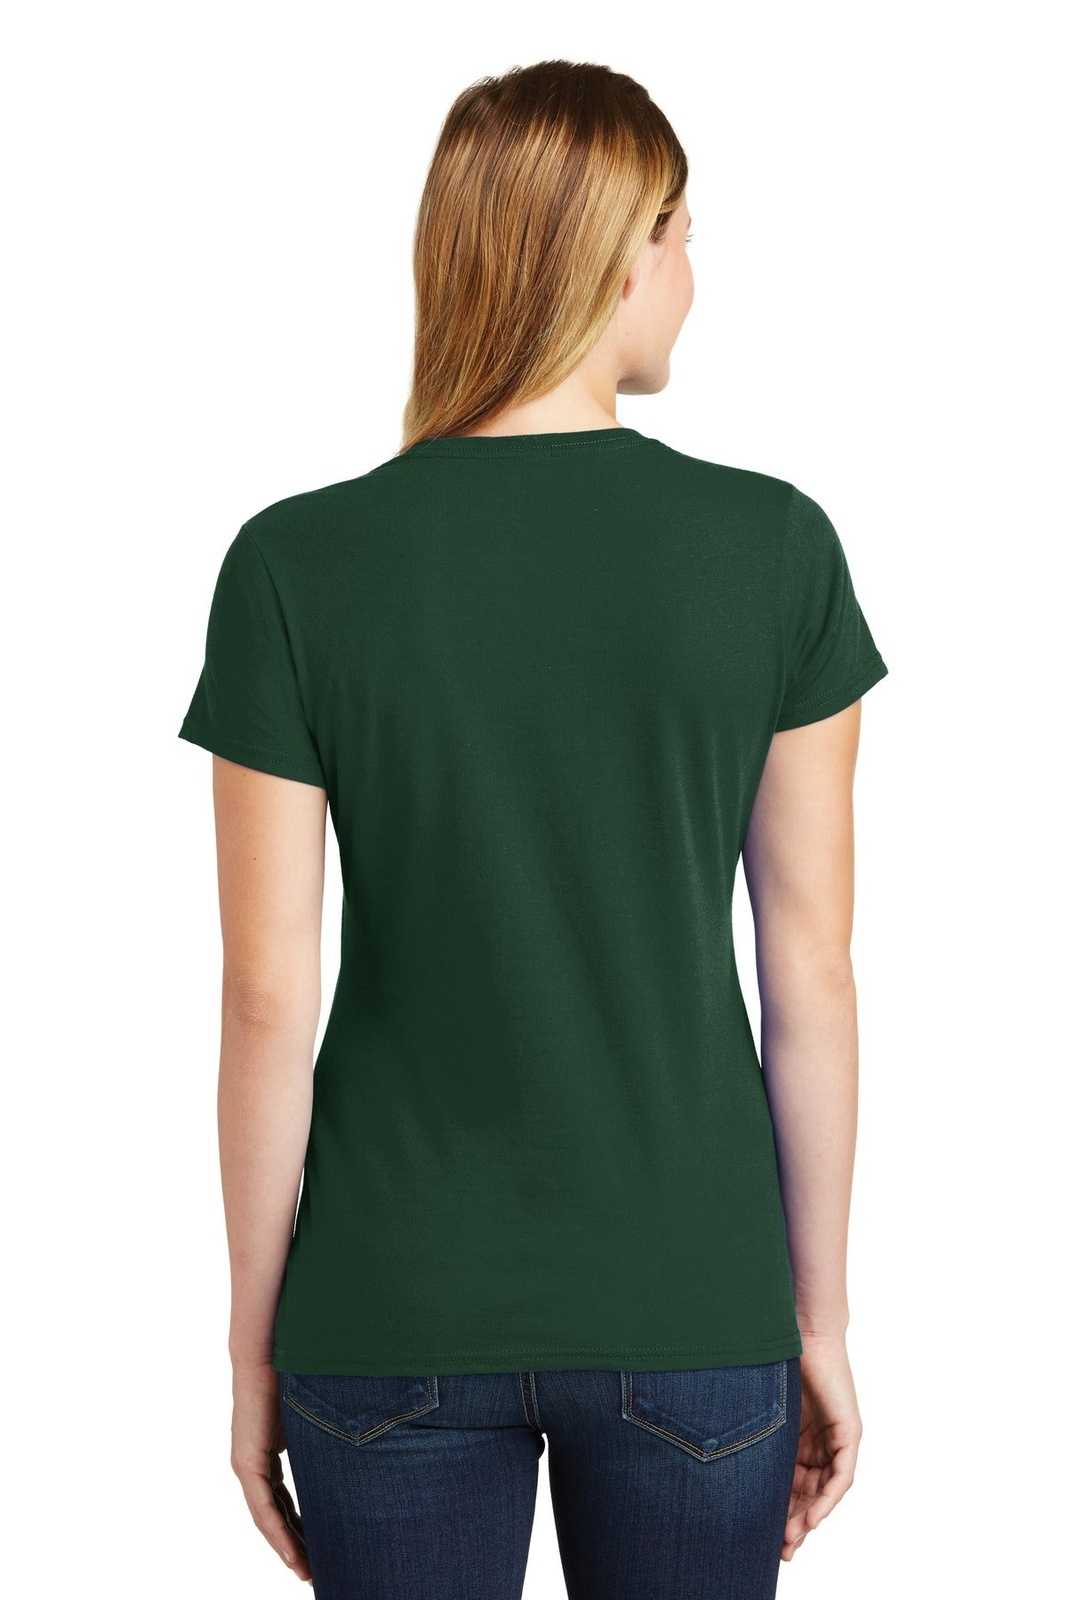 Port &amp; Company LPC450 Ladies Fan Favorite Tee - Forest Green - HIT a Double - 2